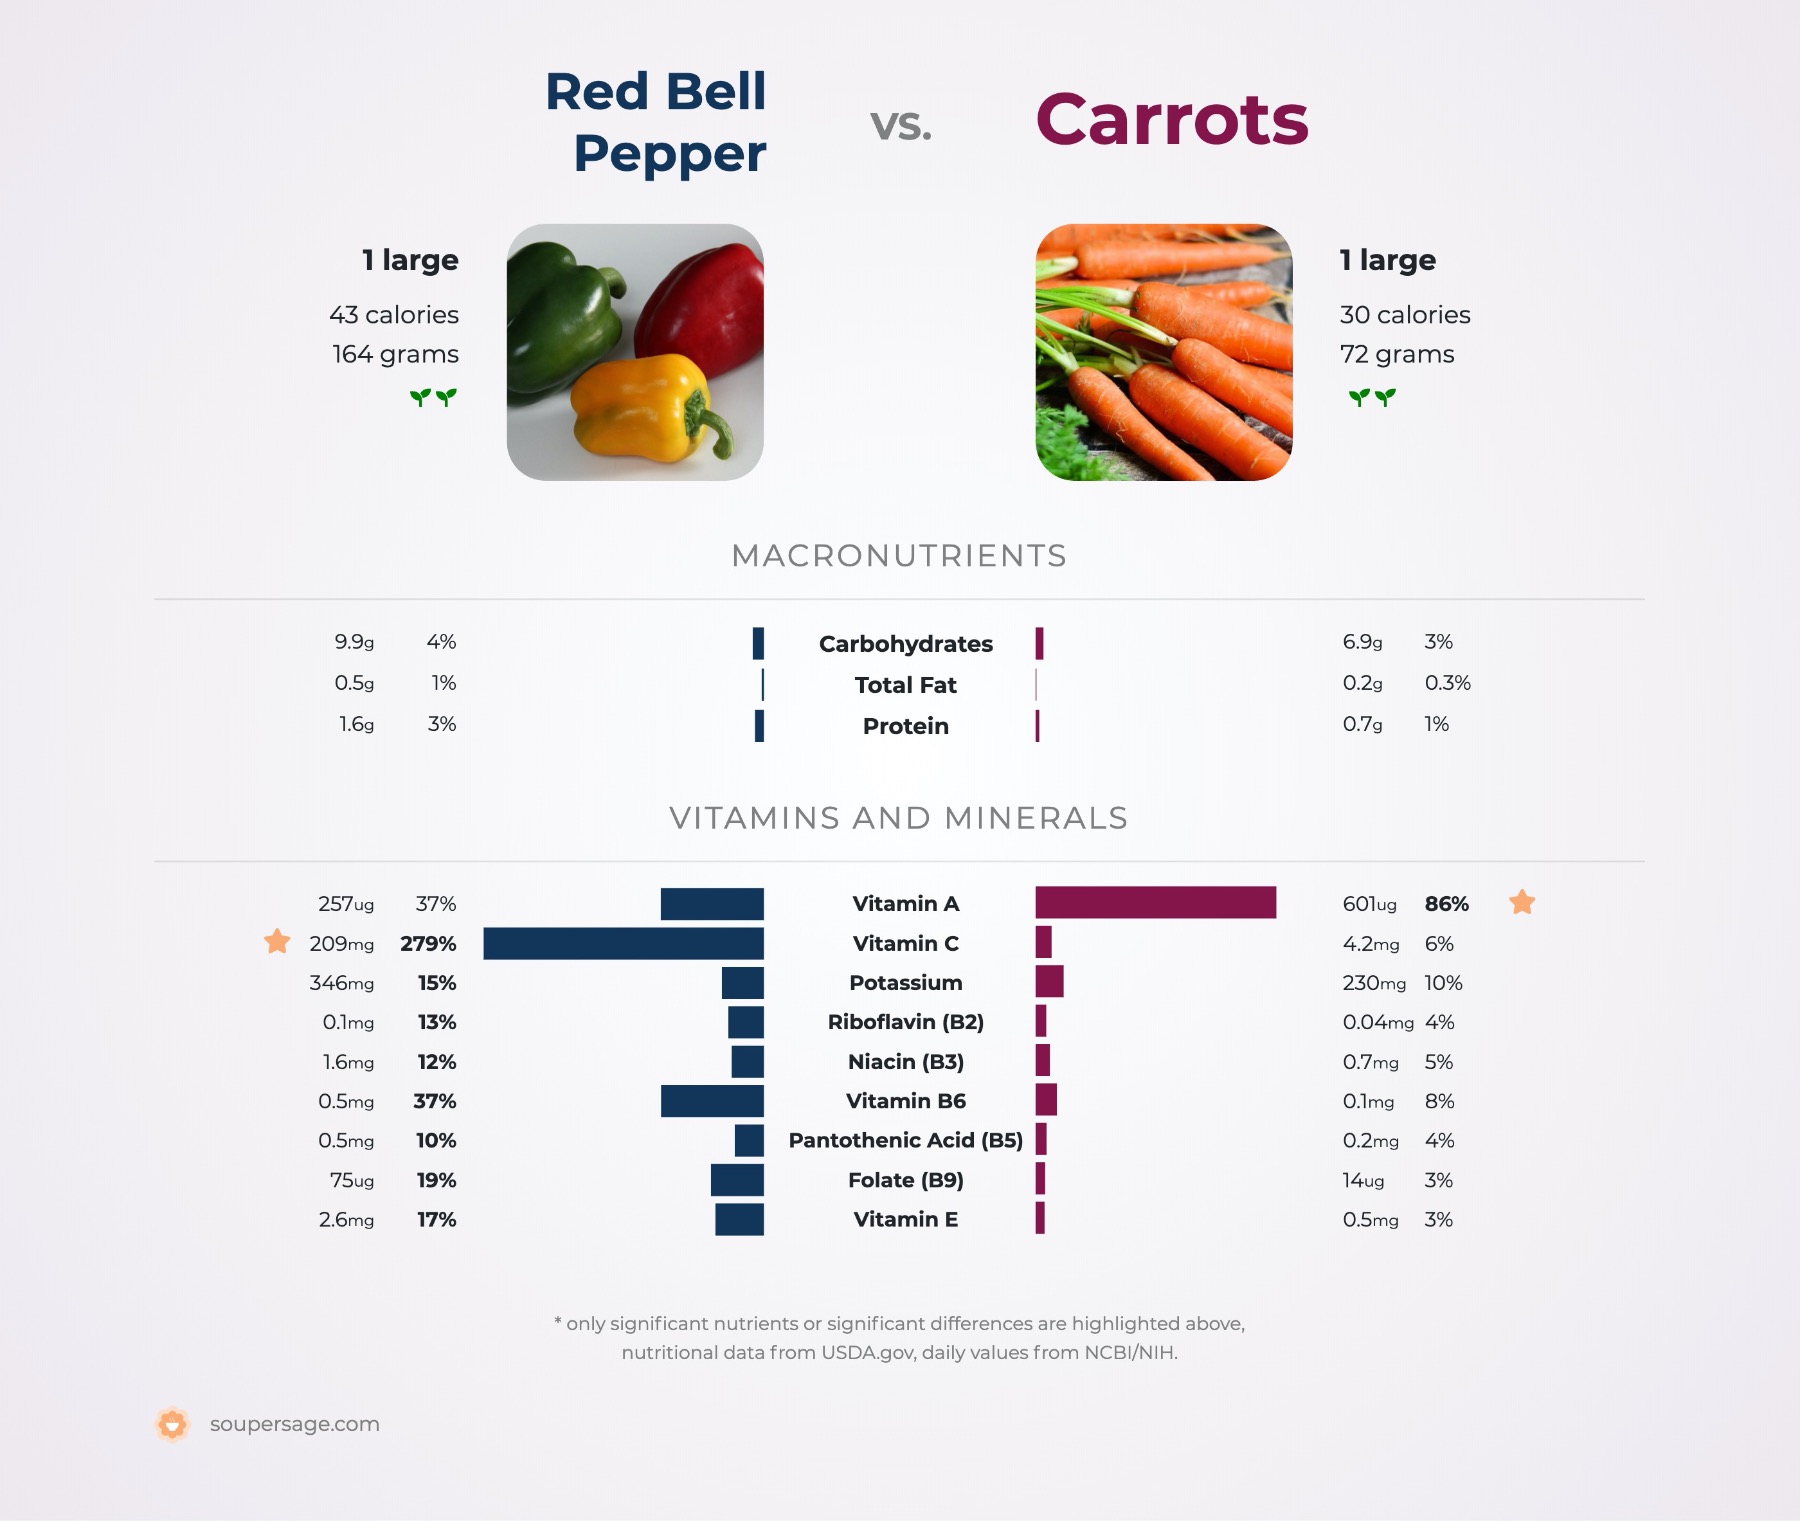 nutrition comparison of carrots vs. red bell pepper